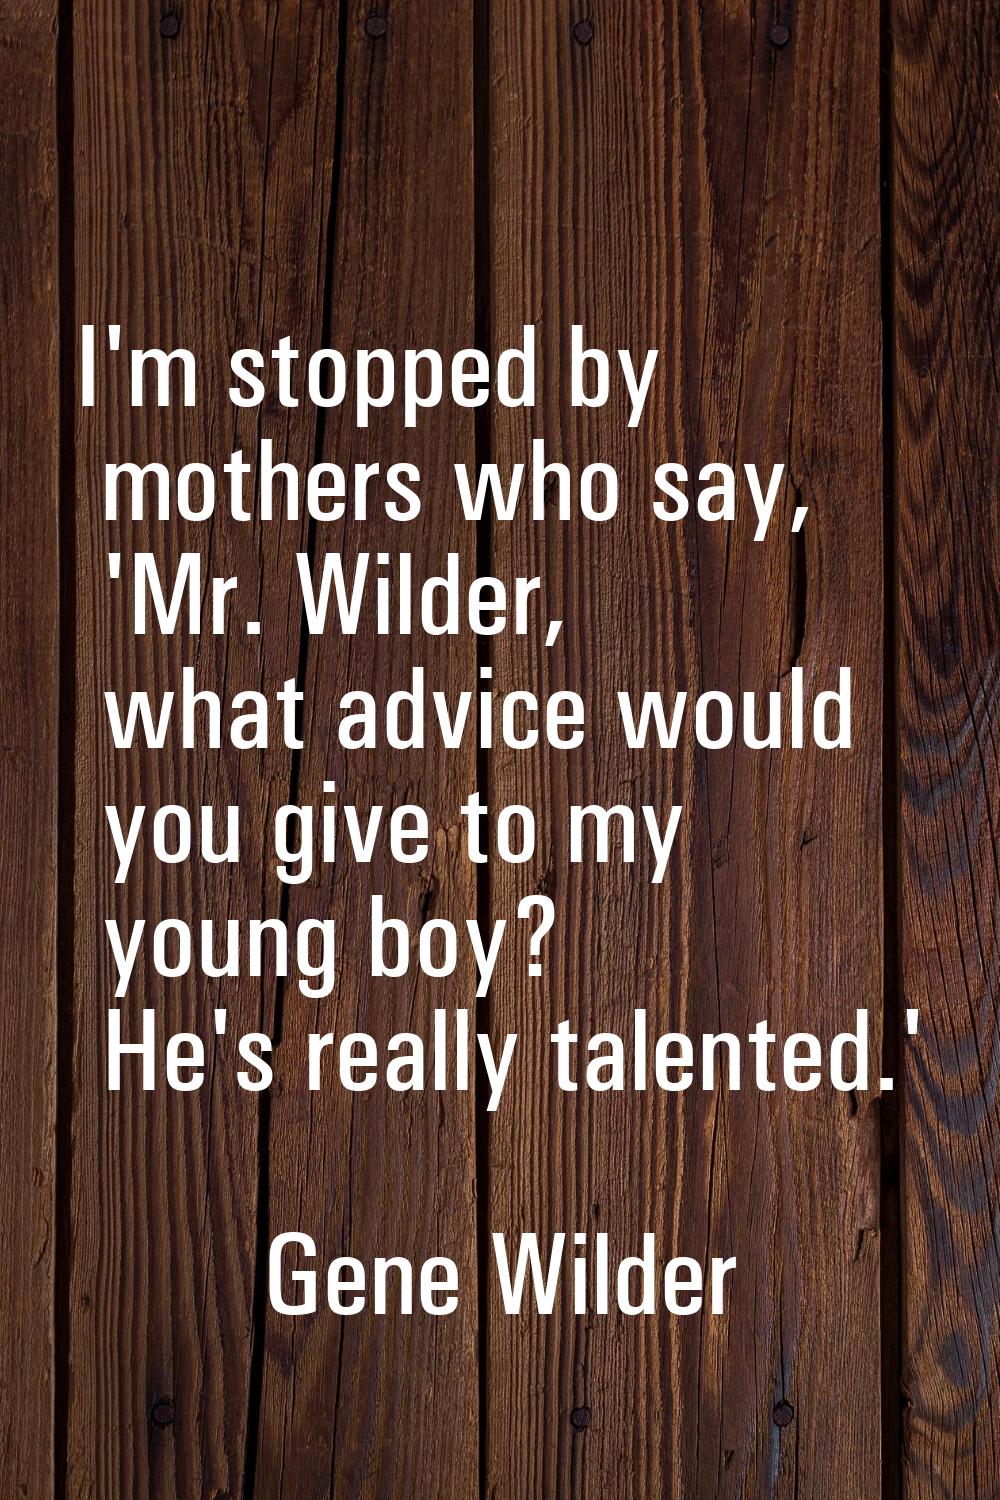 I'm stopped by mothers who say, 'Mr. Wilder, what advice would you give to my young boy? He's reall